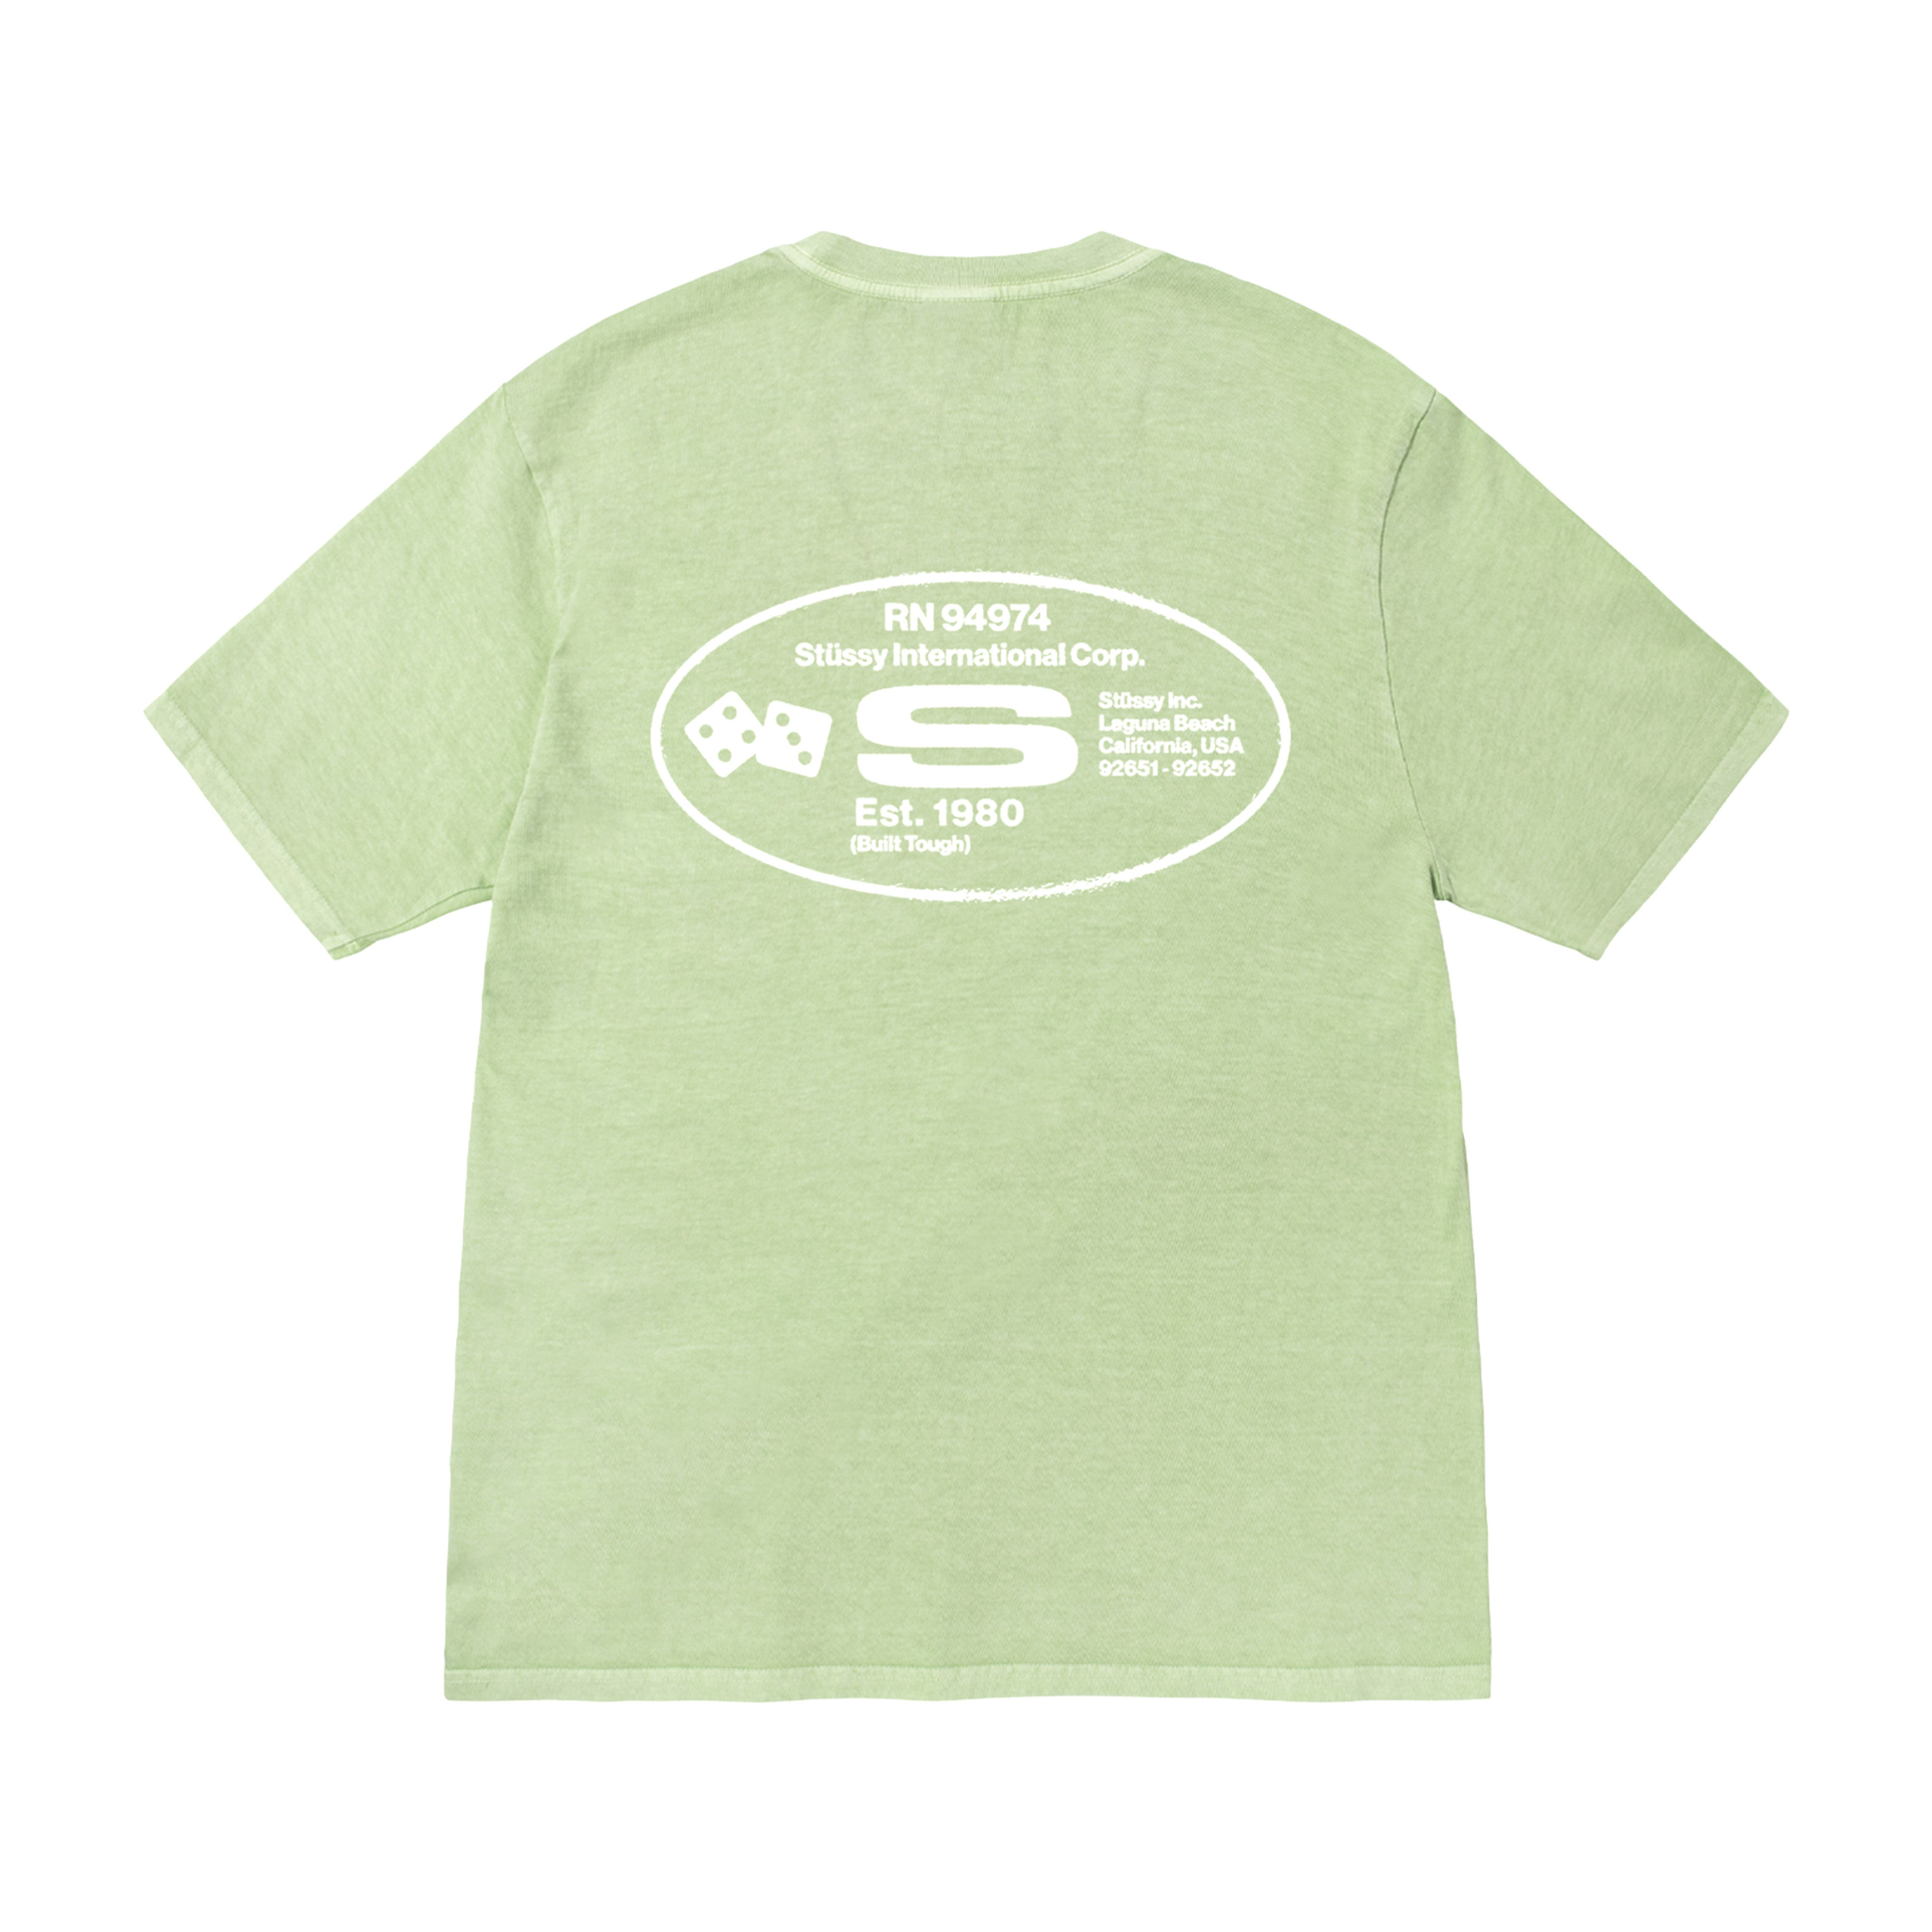 Stüssy - Oval Corp. Pig. Dyed Tee - (Sage)